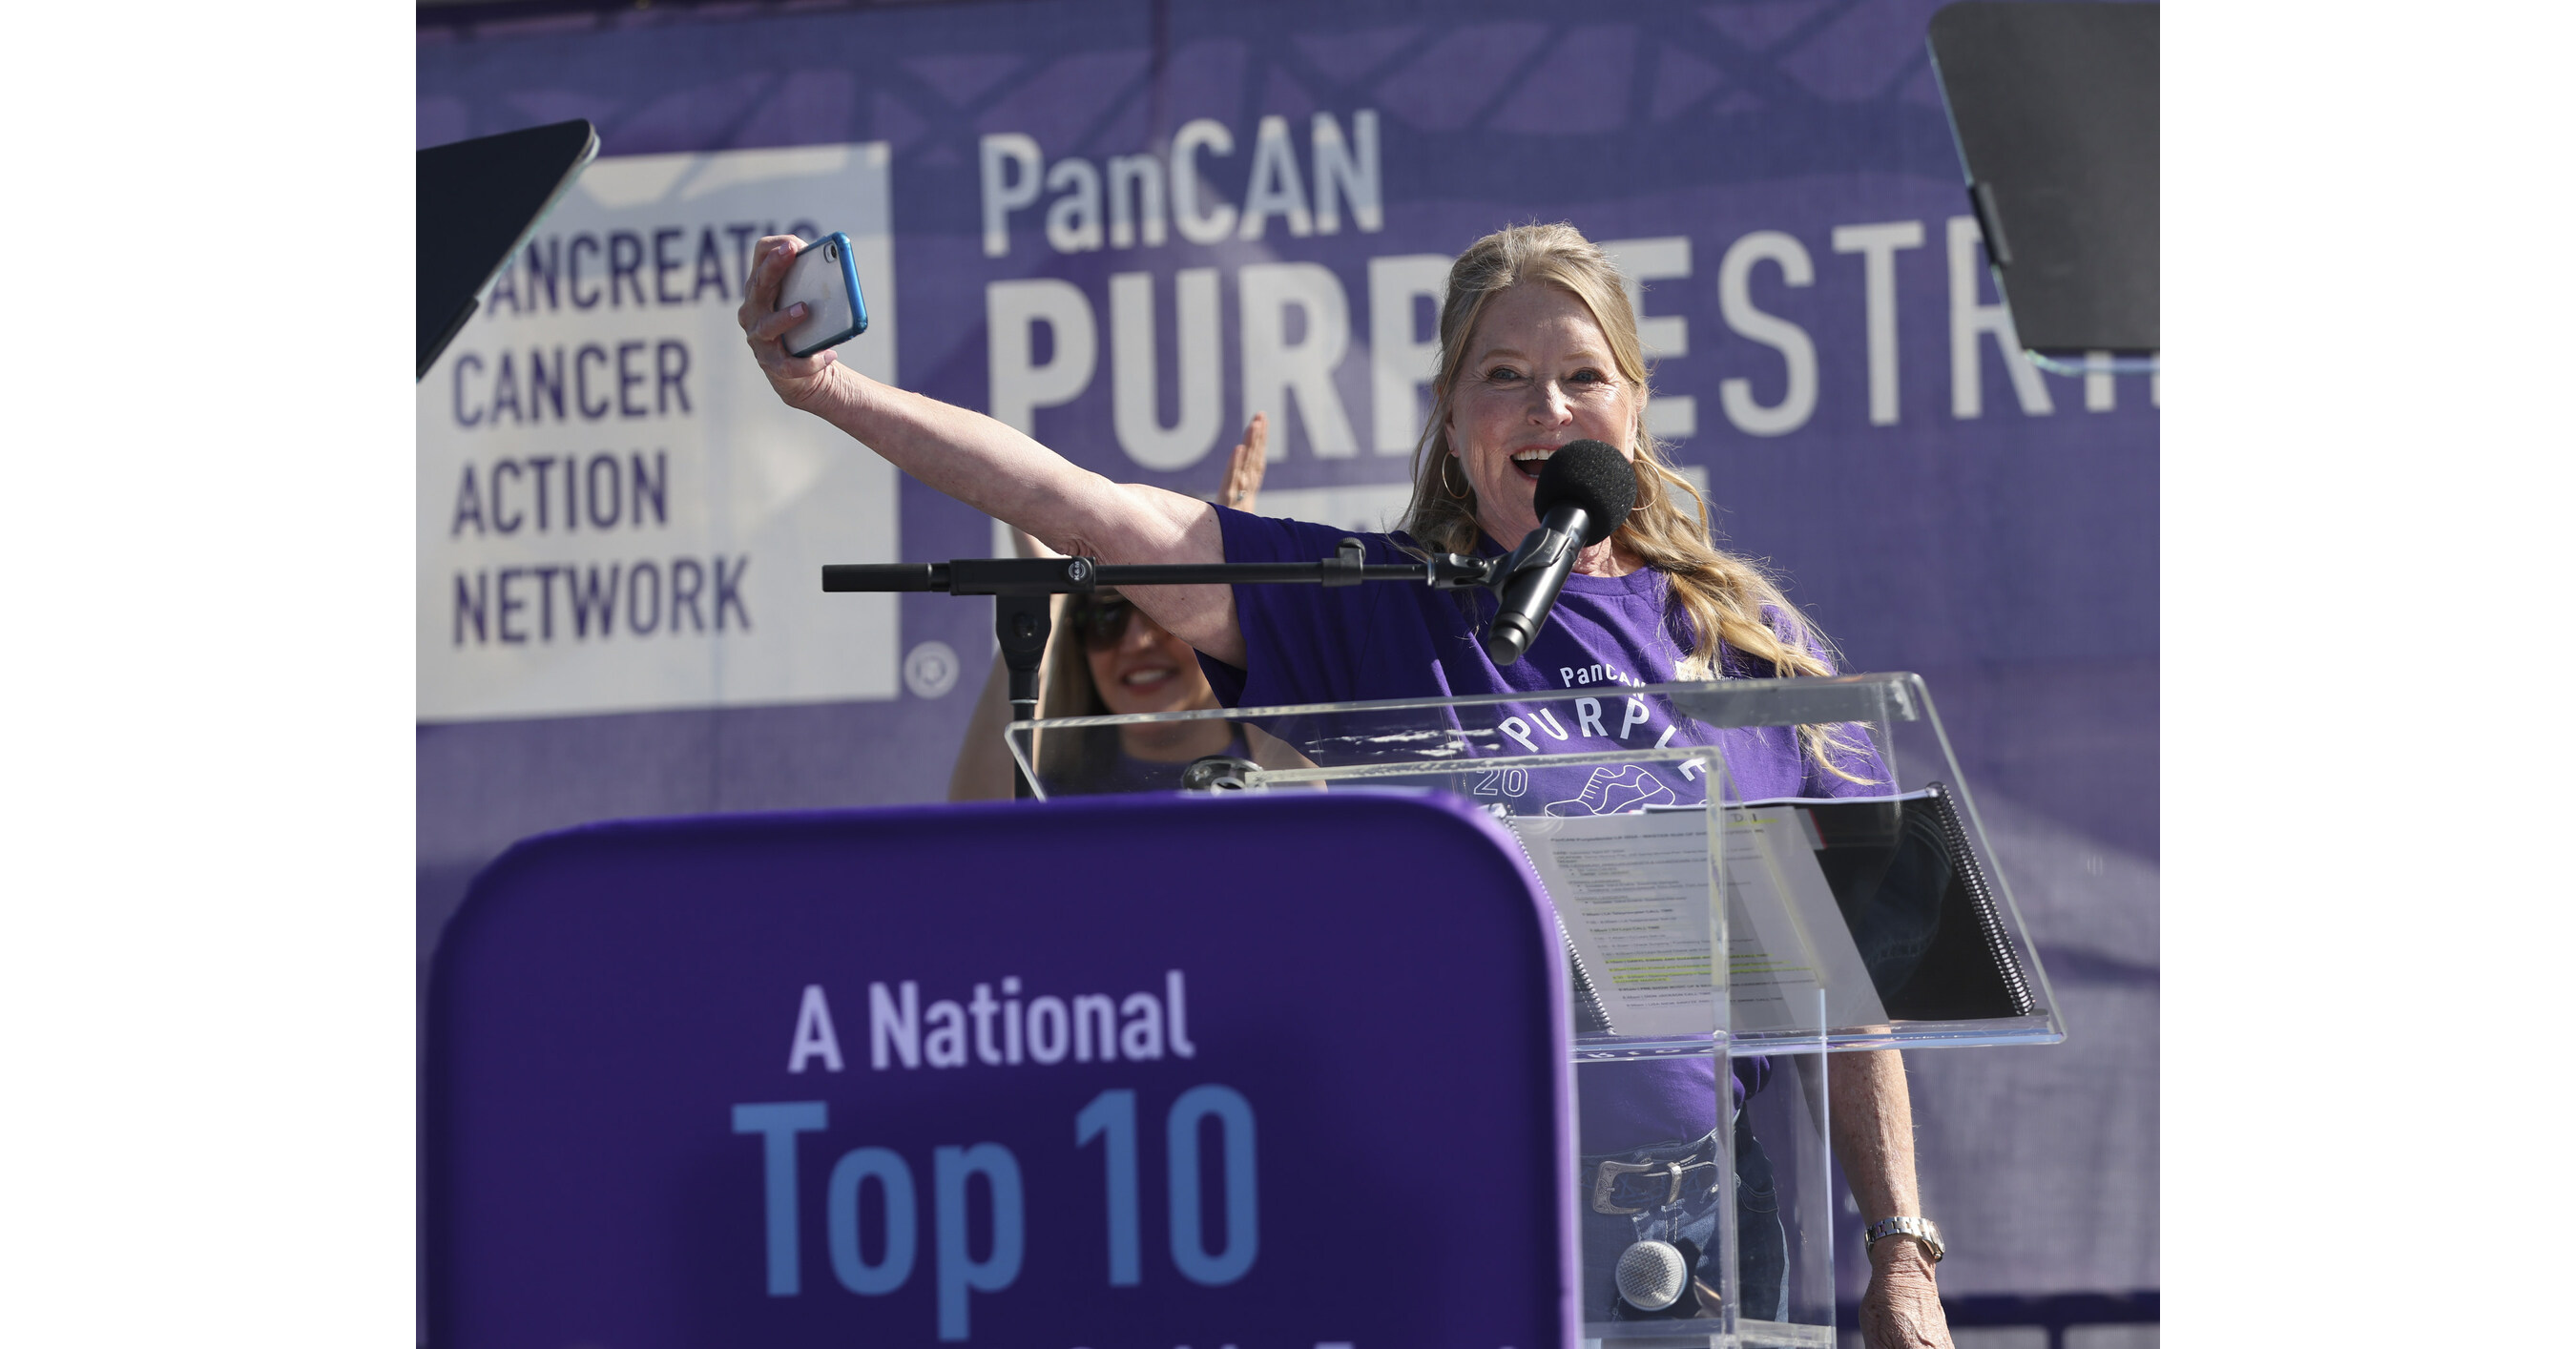 PANCAN PURPLESTRIDE UNITED CELEBRITIES, SURVIVORS, CAREGIVERS AND SUPPORTERS NATIONWIDE AT THE ULTIMATE WALK TO END PANCREATIC CANCER